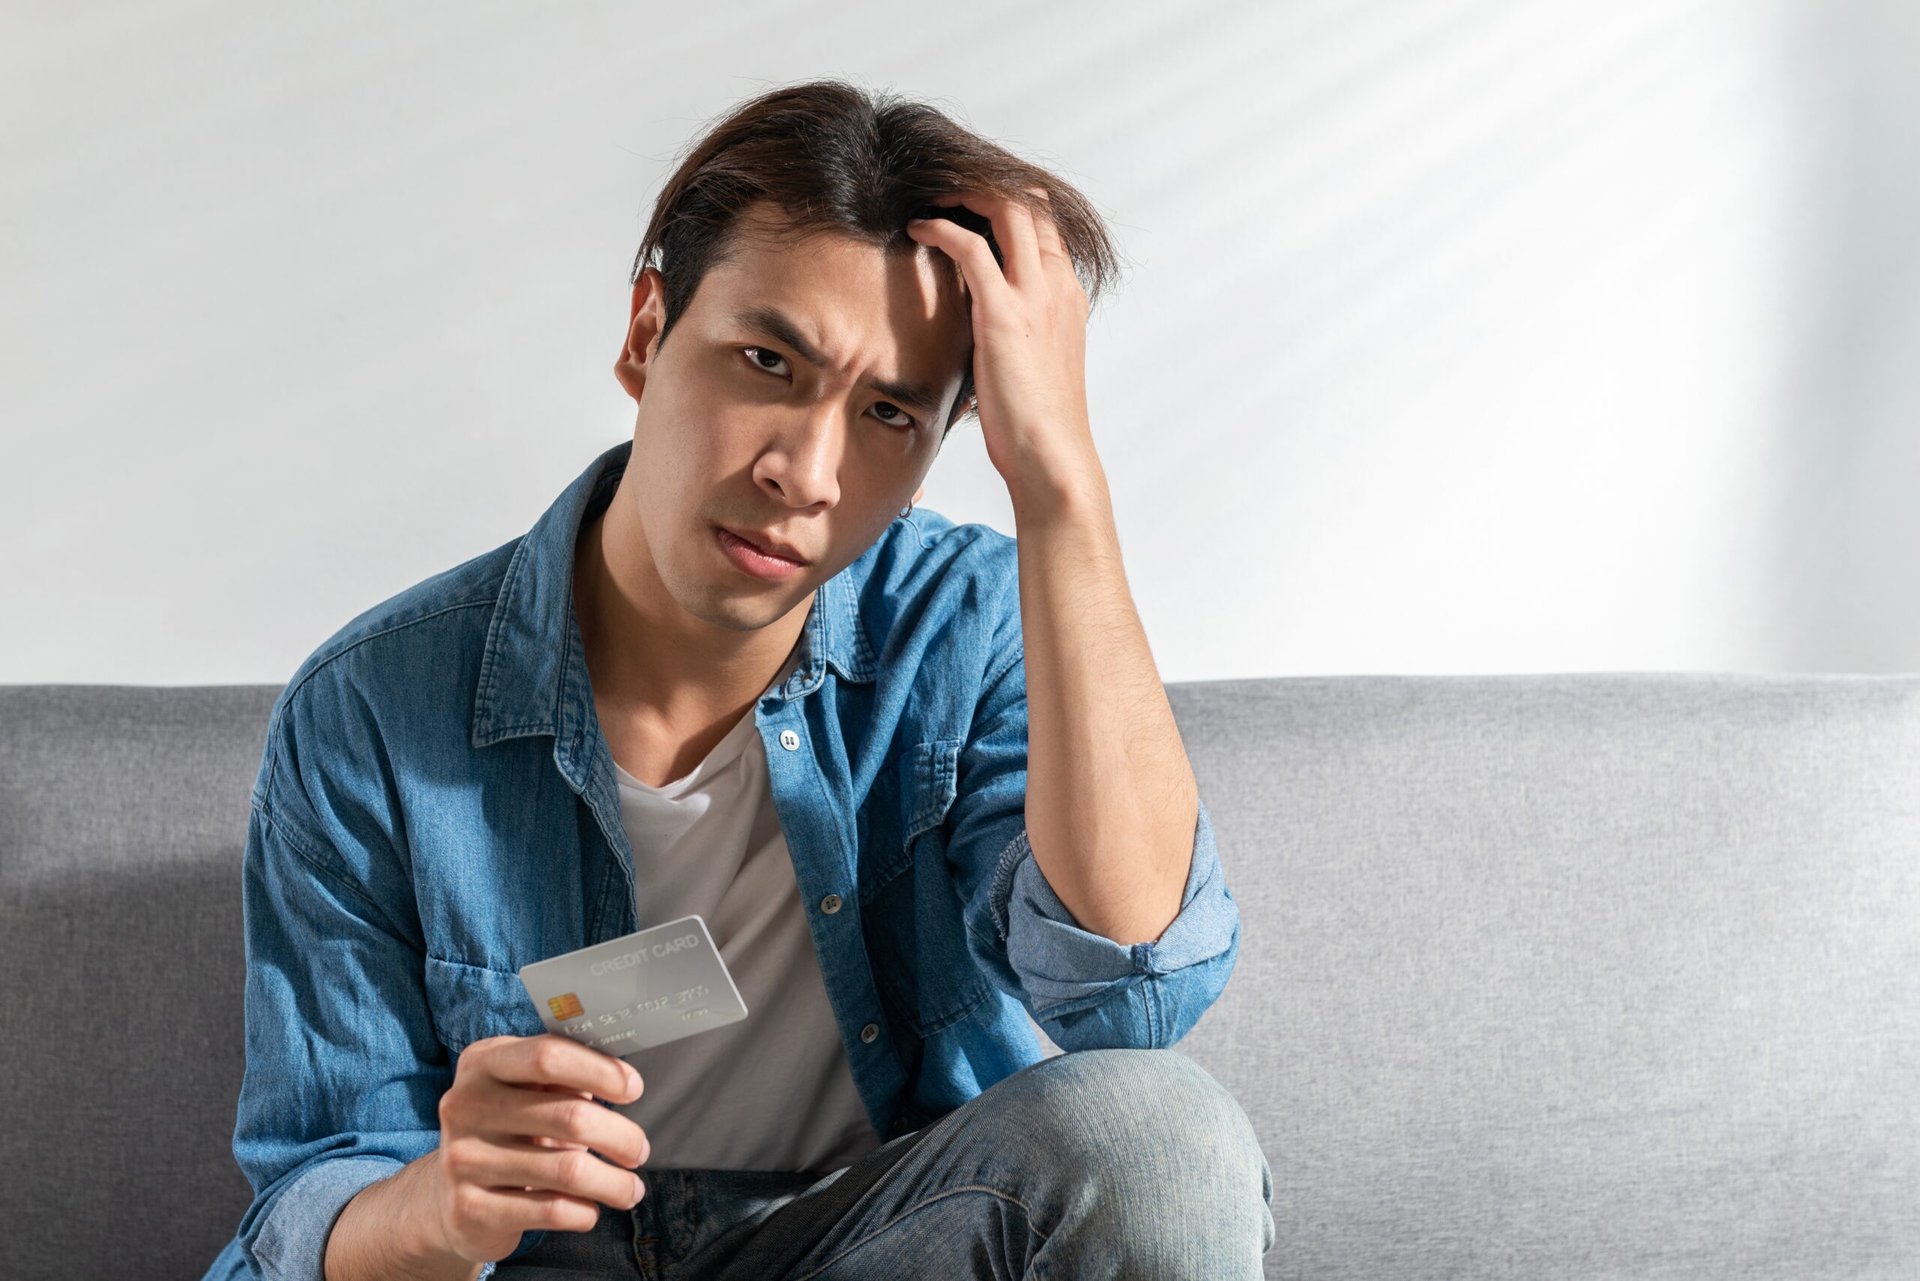 Unhappy man holding a credit card